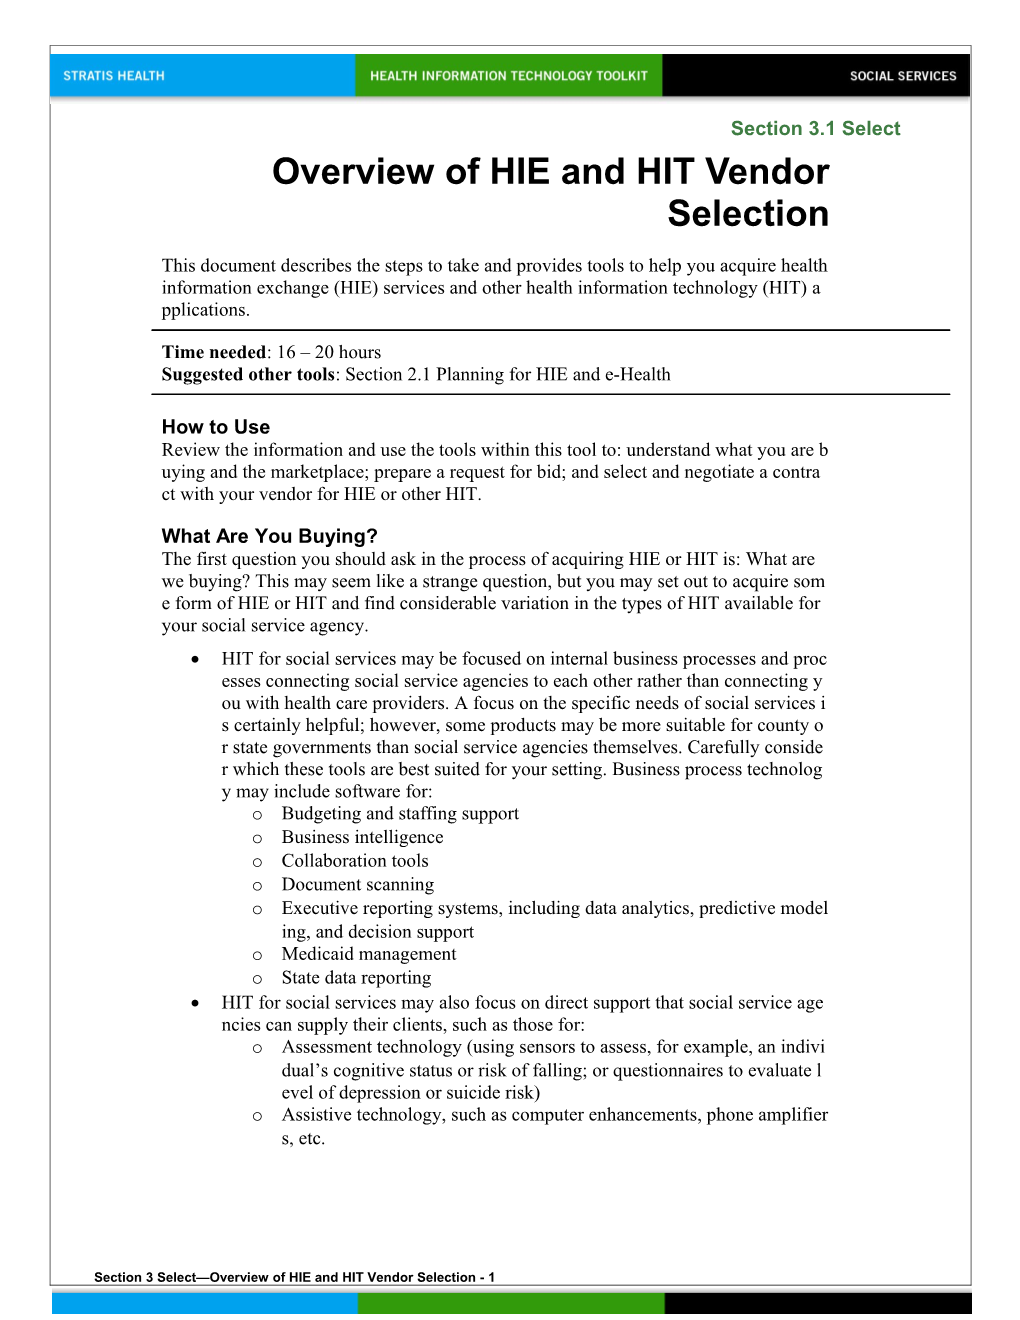 3 Overview of HIE and HIT Vendor Selection